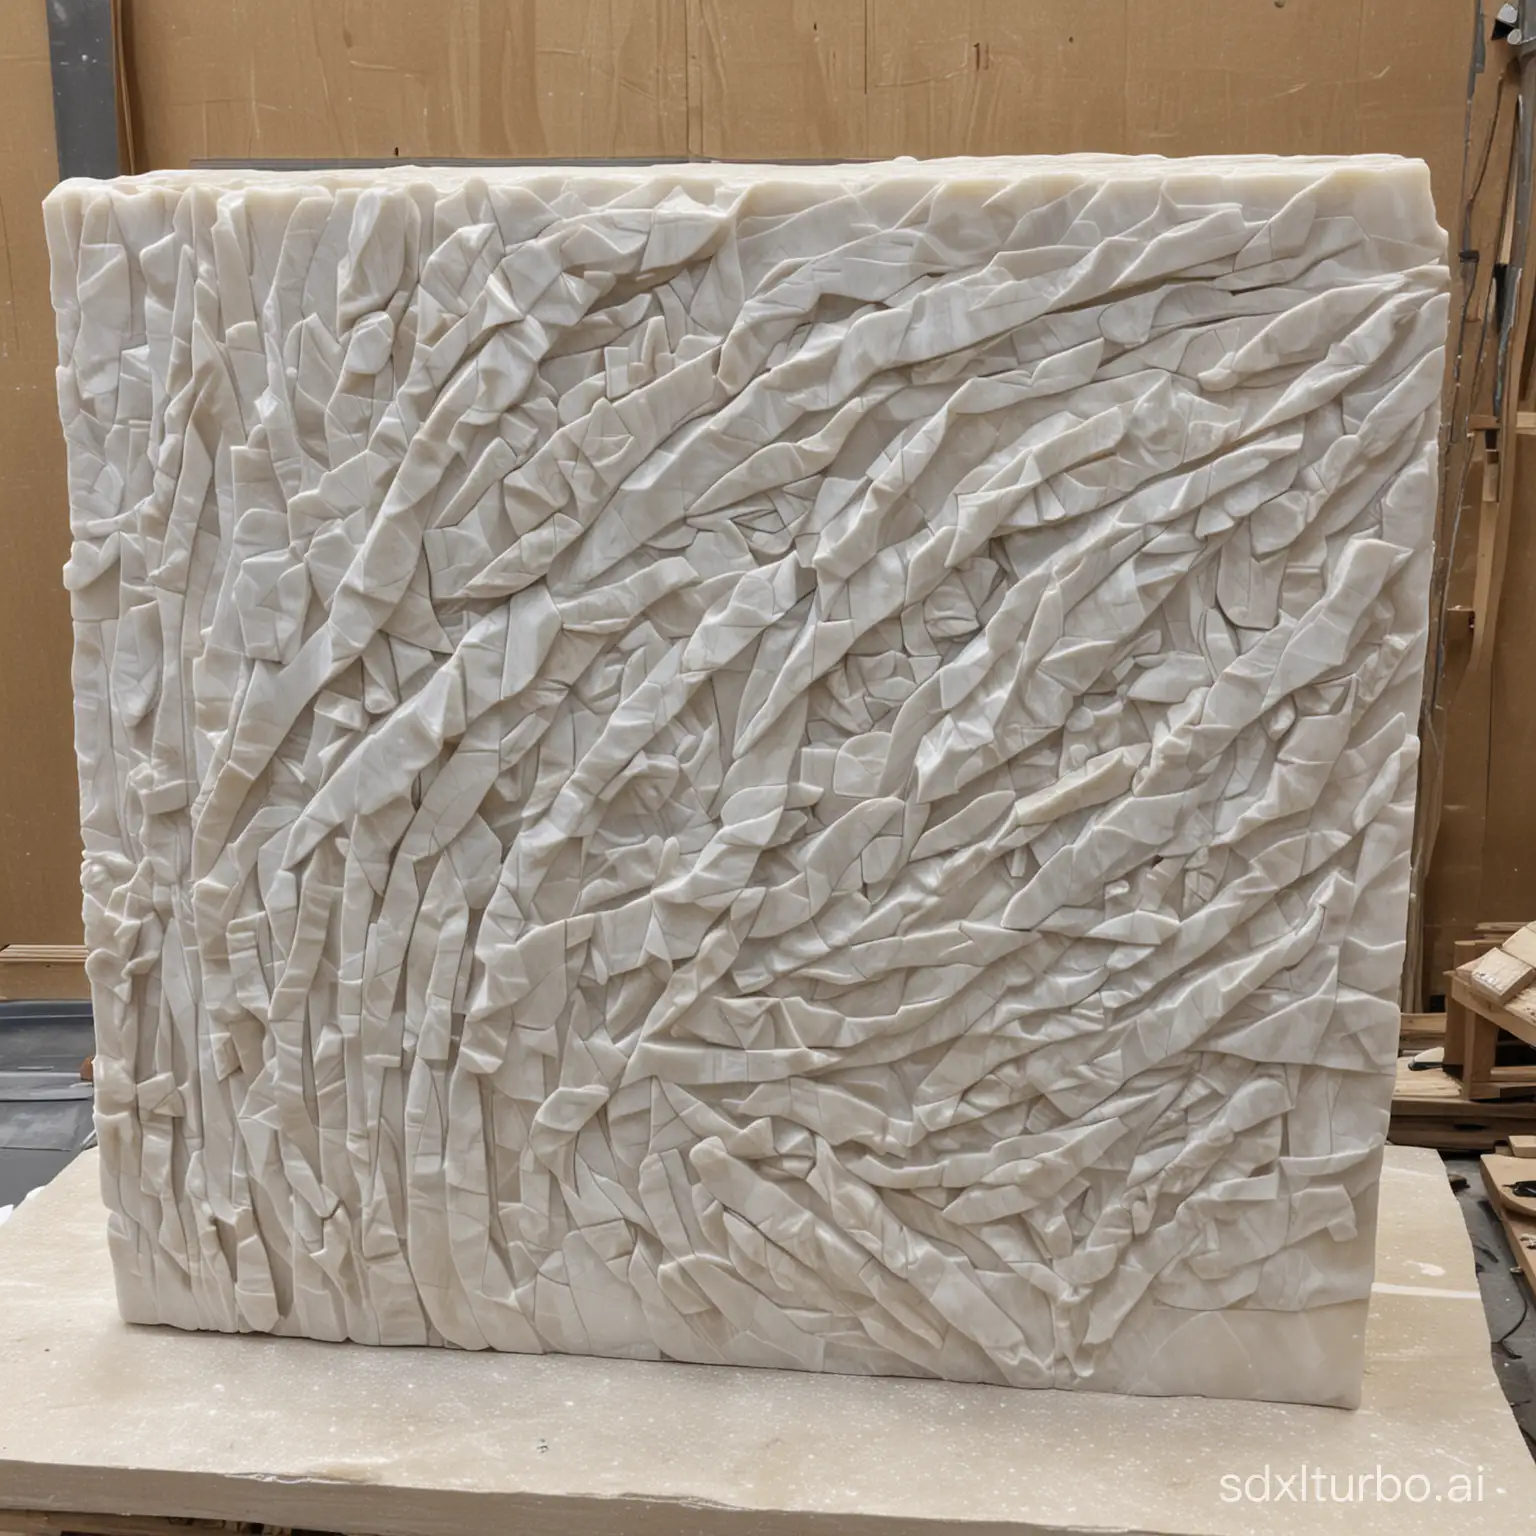 The sculpture is already complete within the raw clean marble block, before I start my work. It is already there, I just have to chisel away the superfluous material.